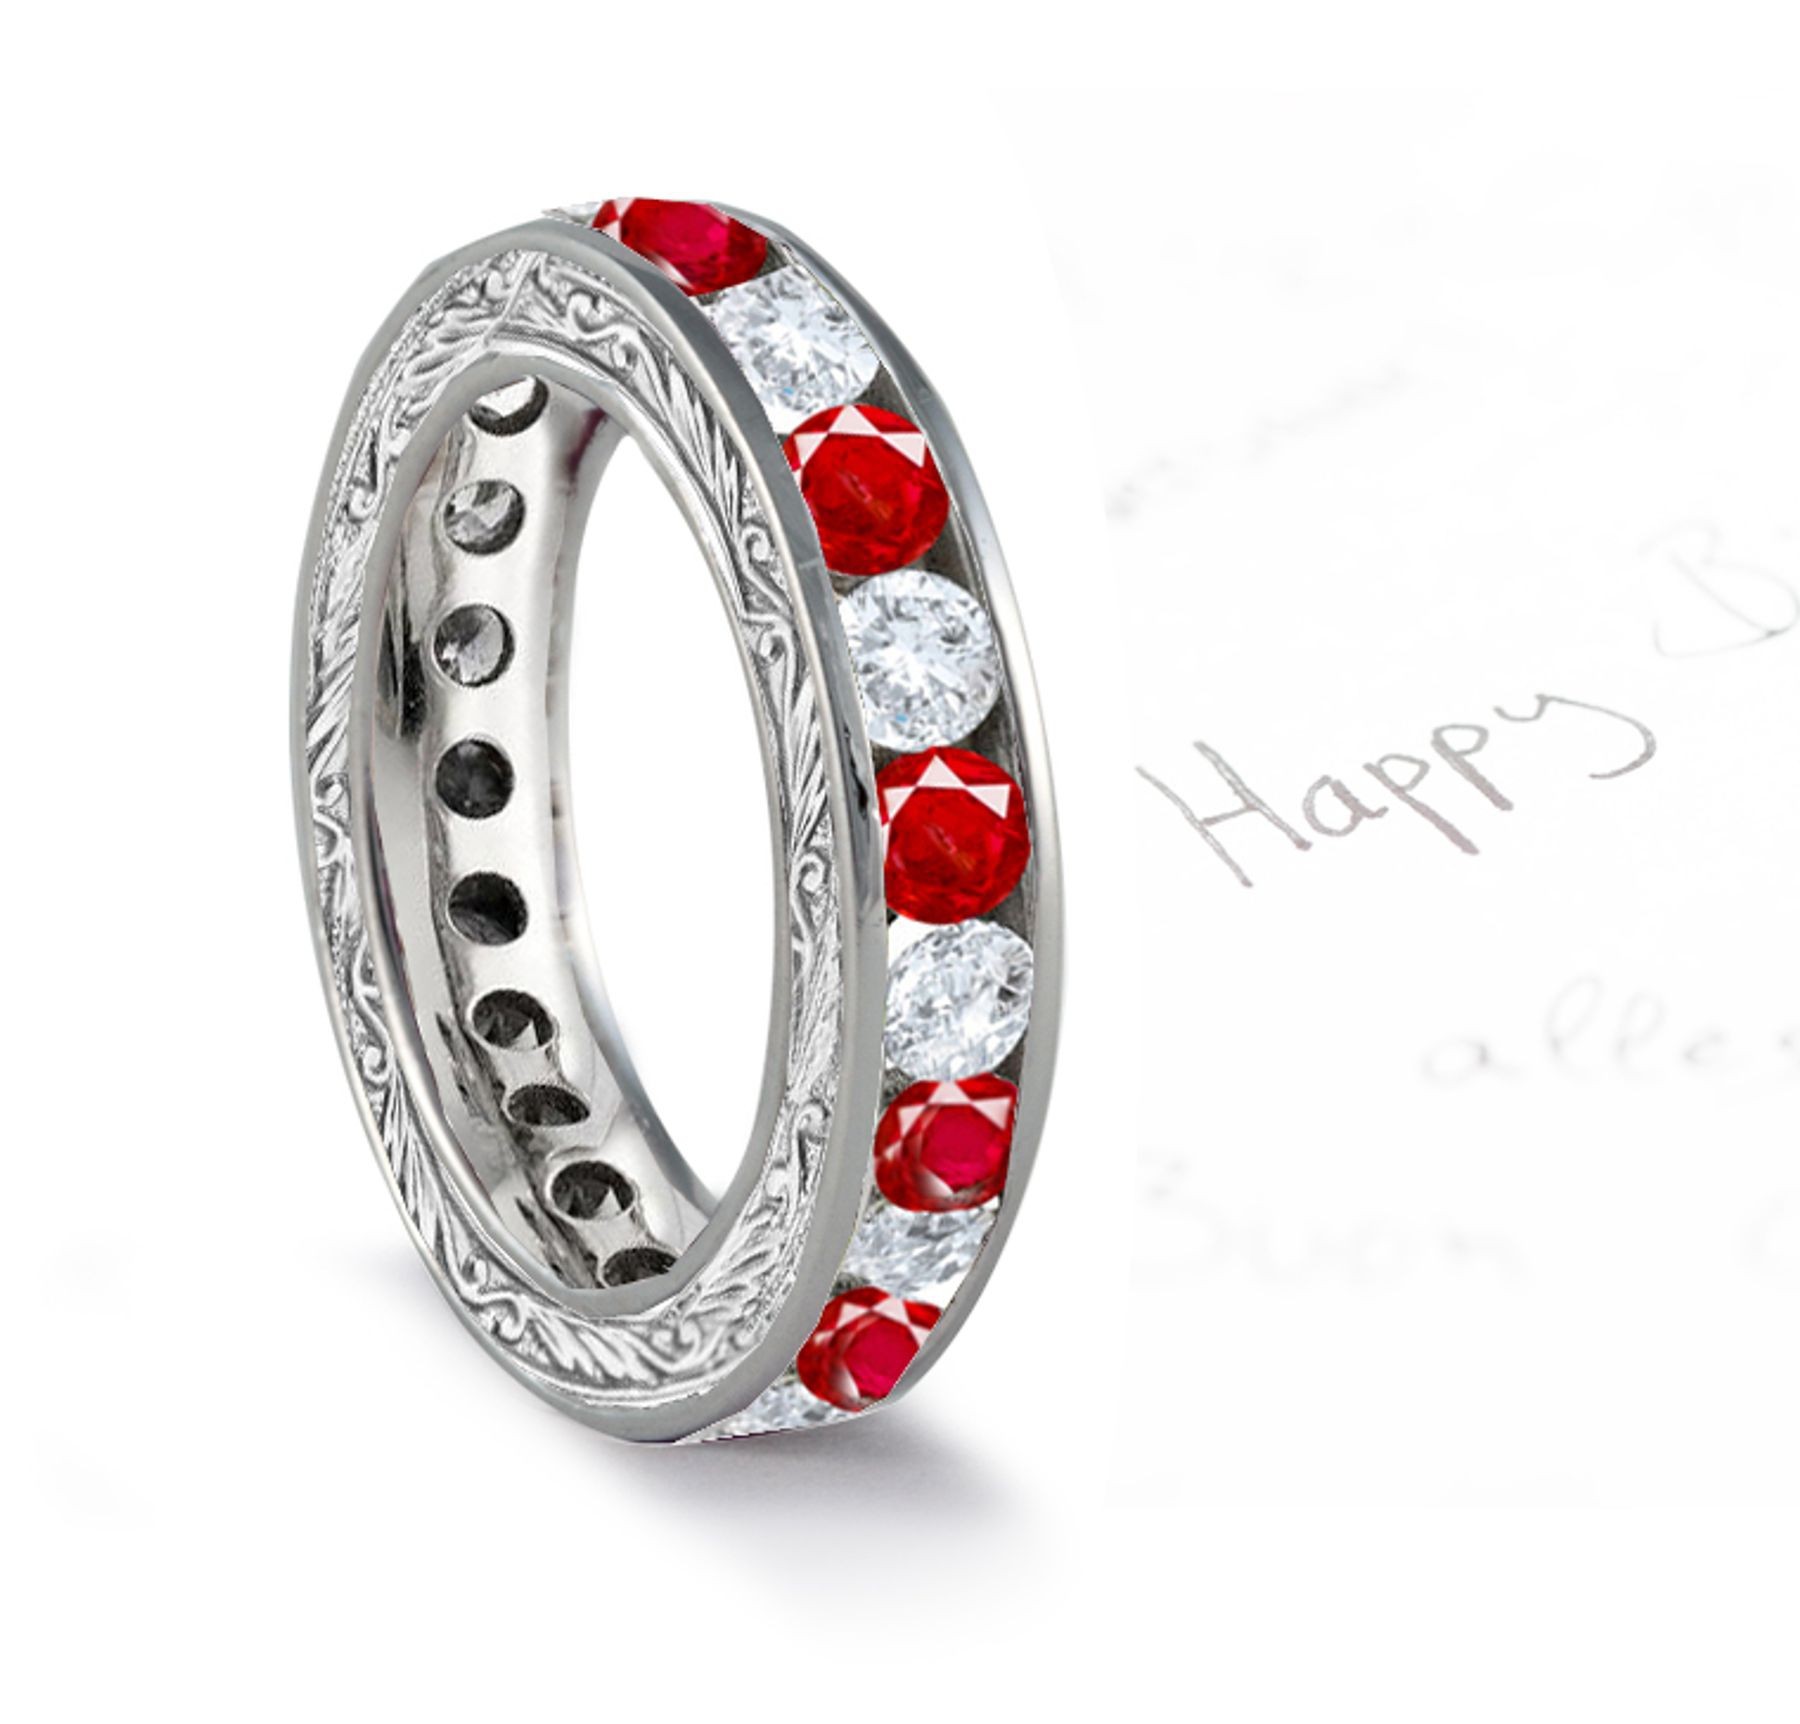 Diamond & Ruby Wedding Band with Scrolls Motifs on Sides in 14k Gold